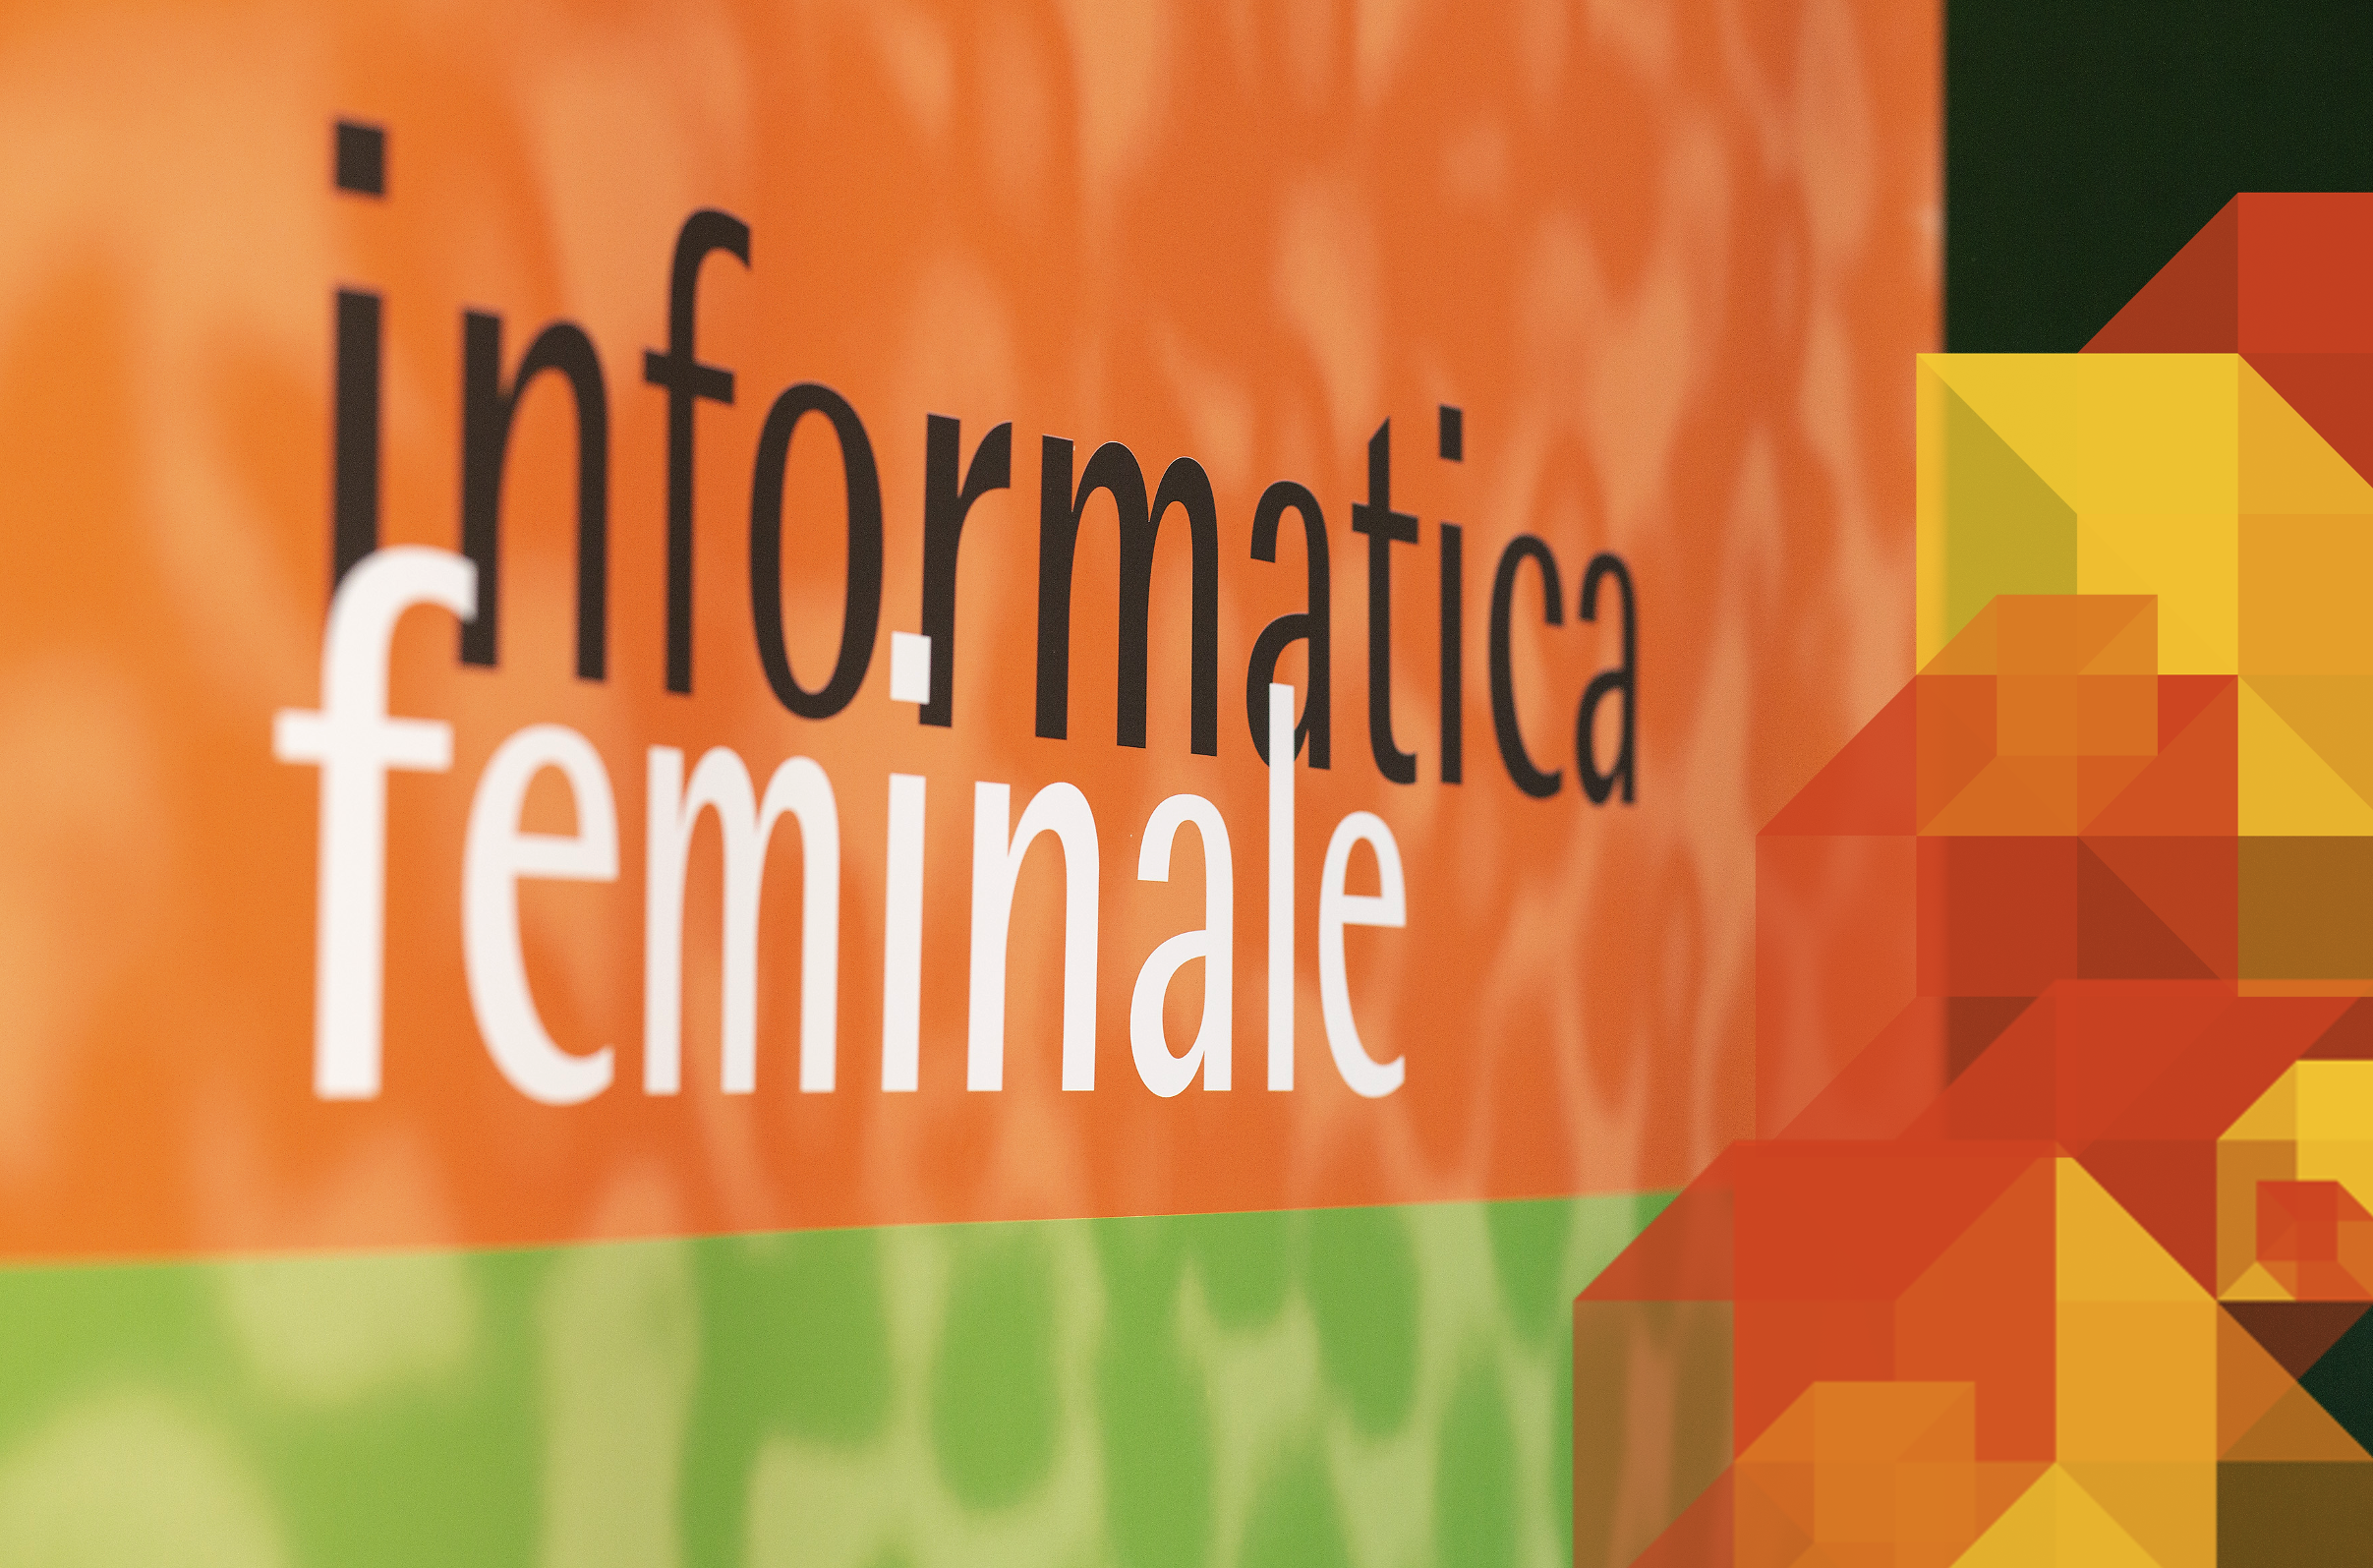 Lunch and dinner in the course of informatica feminale